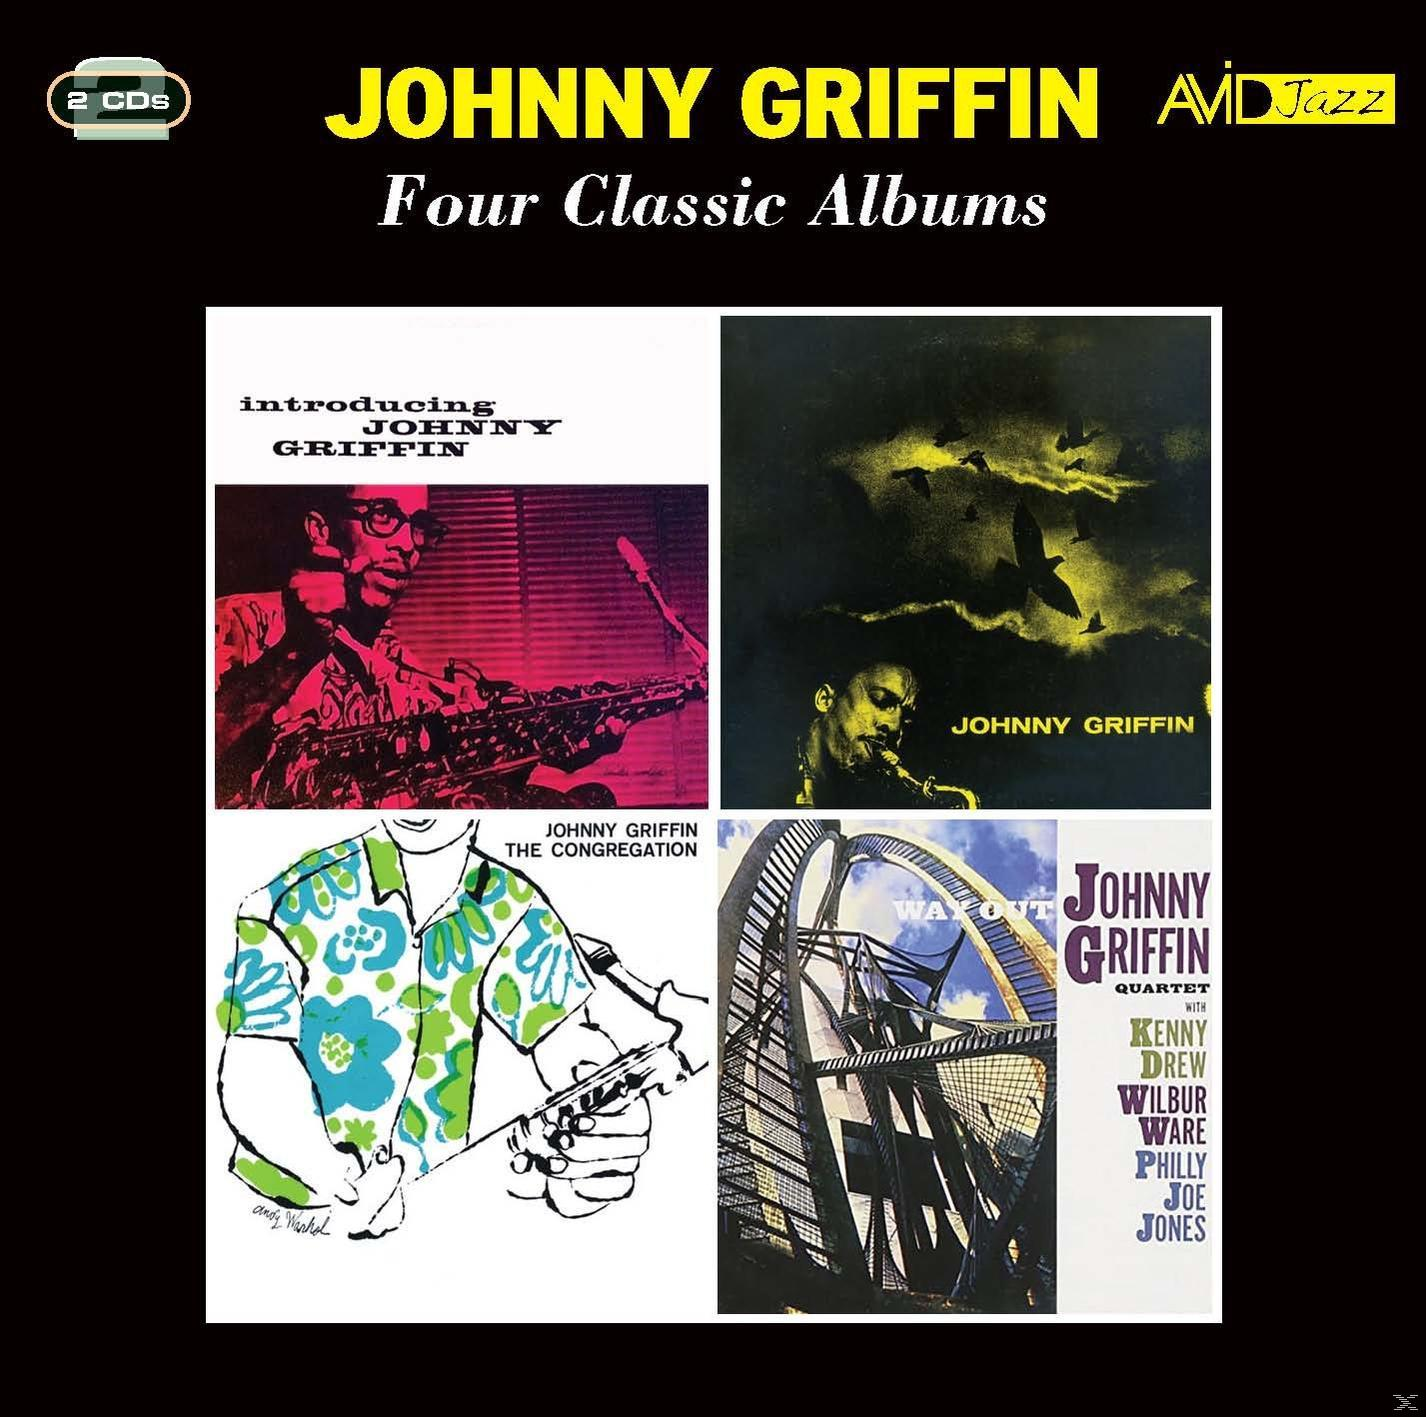 Johnny Griffin - - (CD) Classic Albums Four